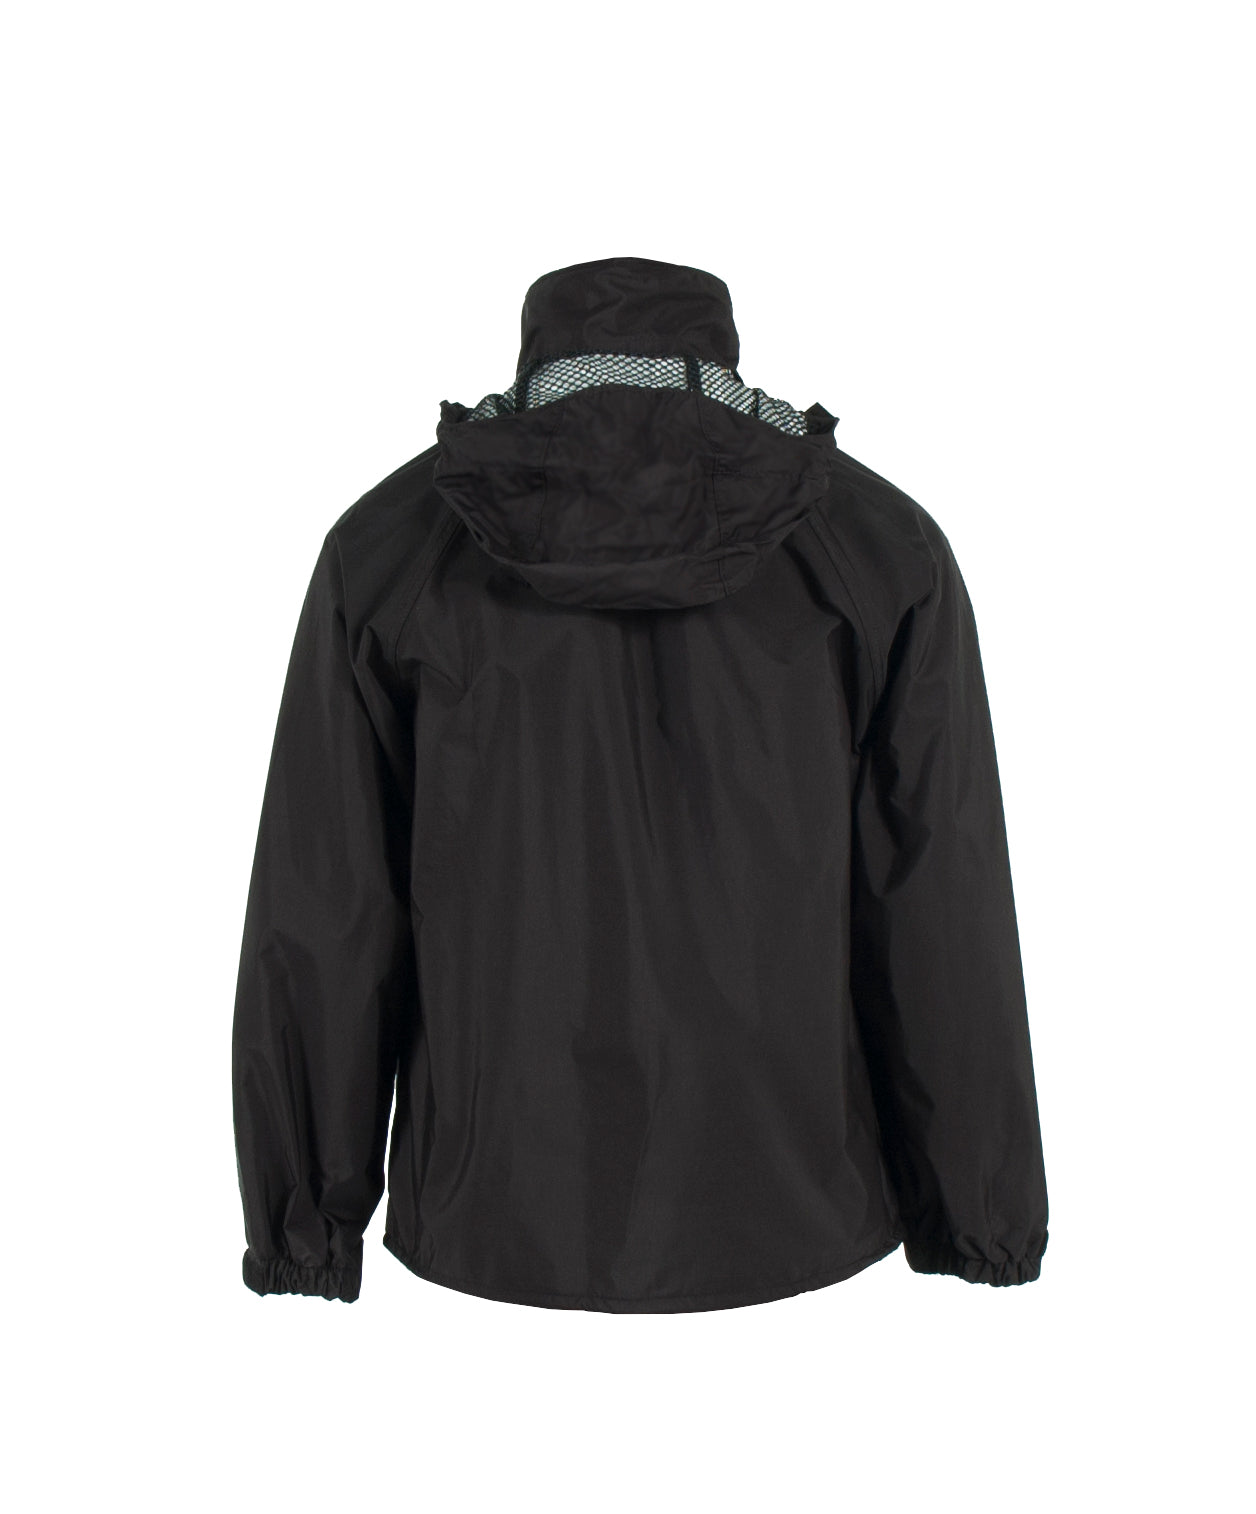 Radians 523AJ Breathable Jacket with Attached Hood